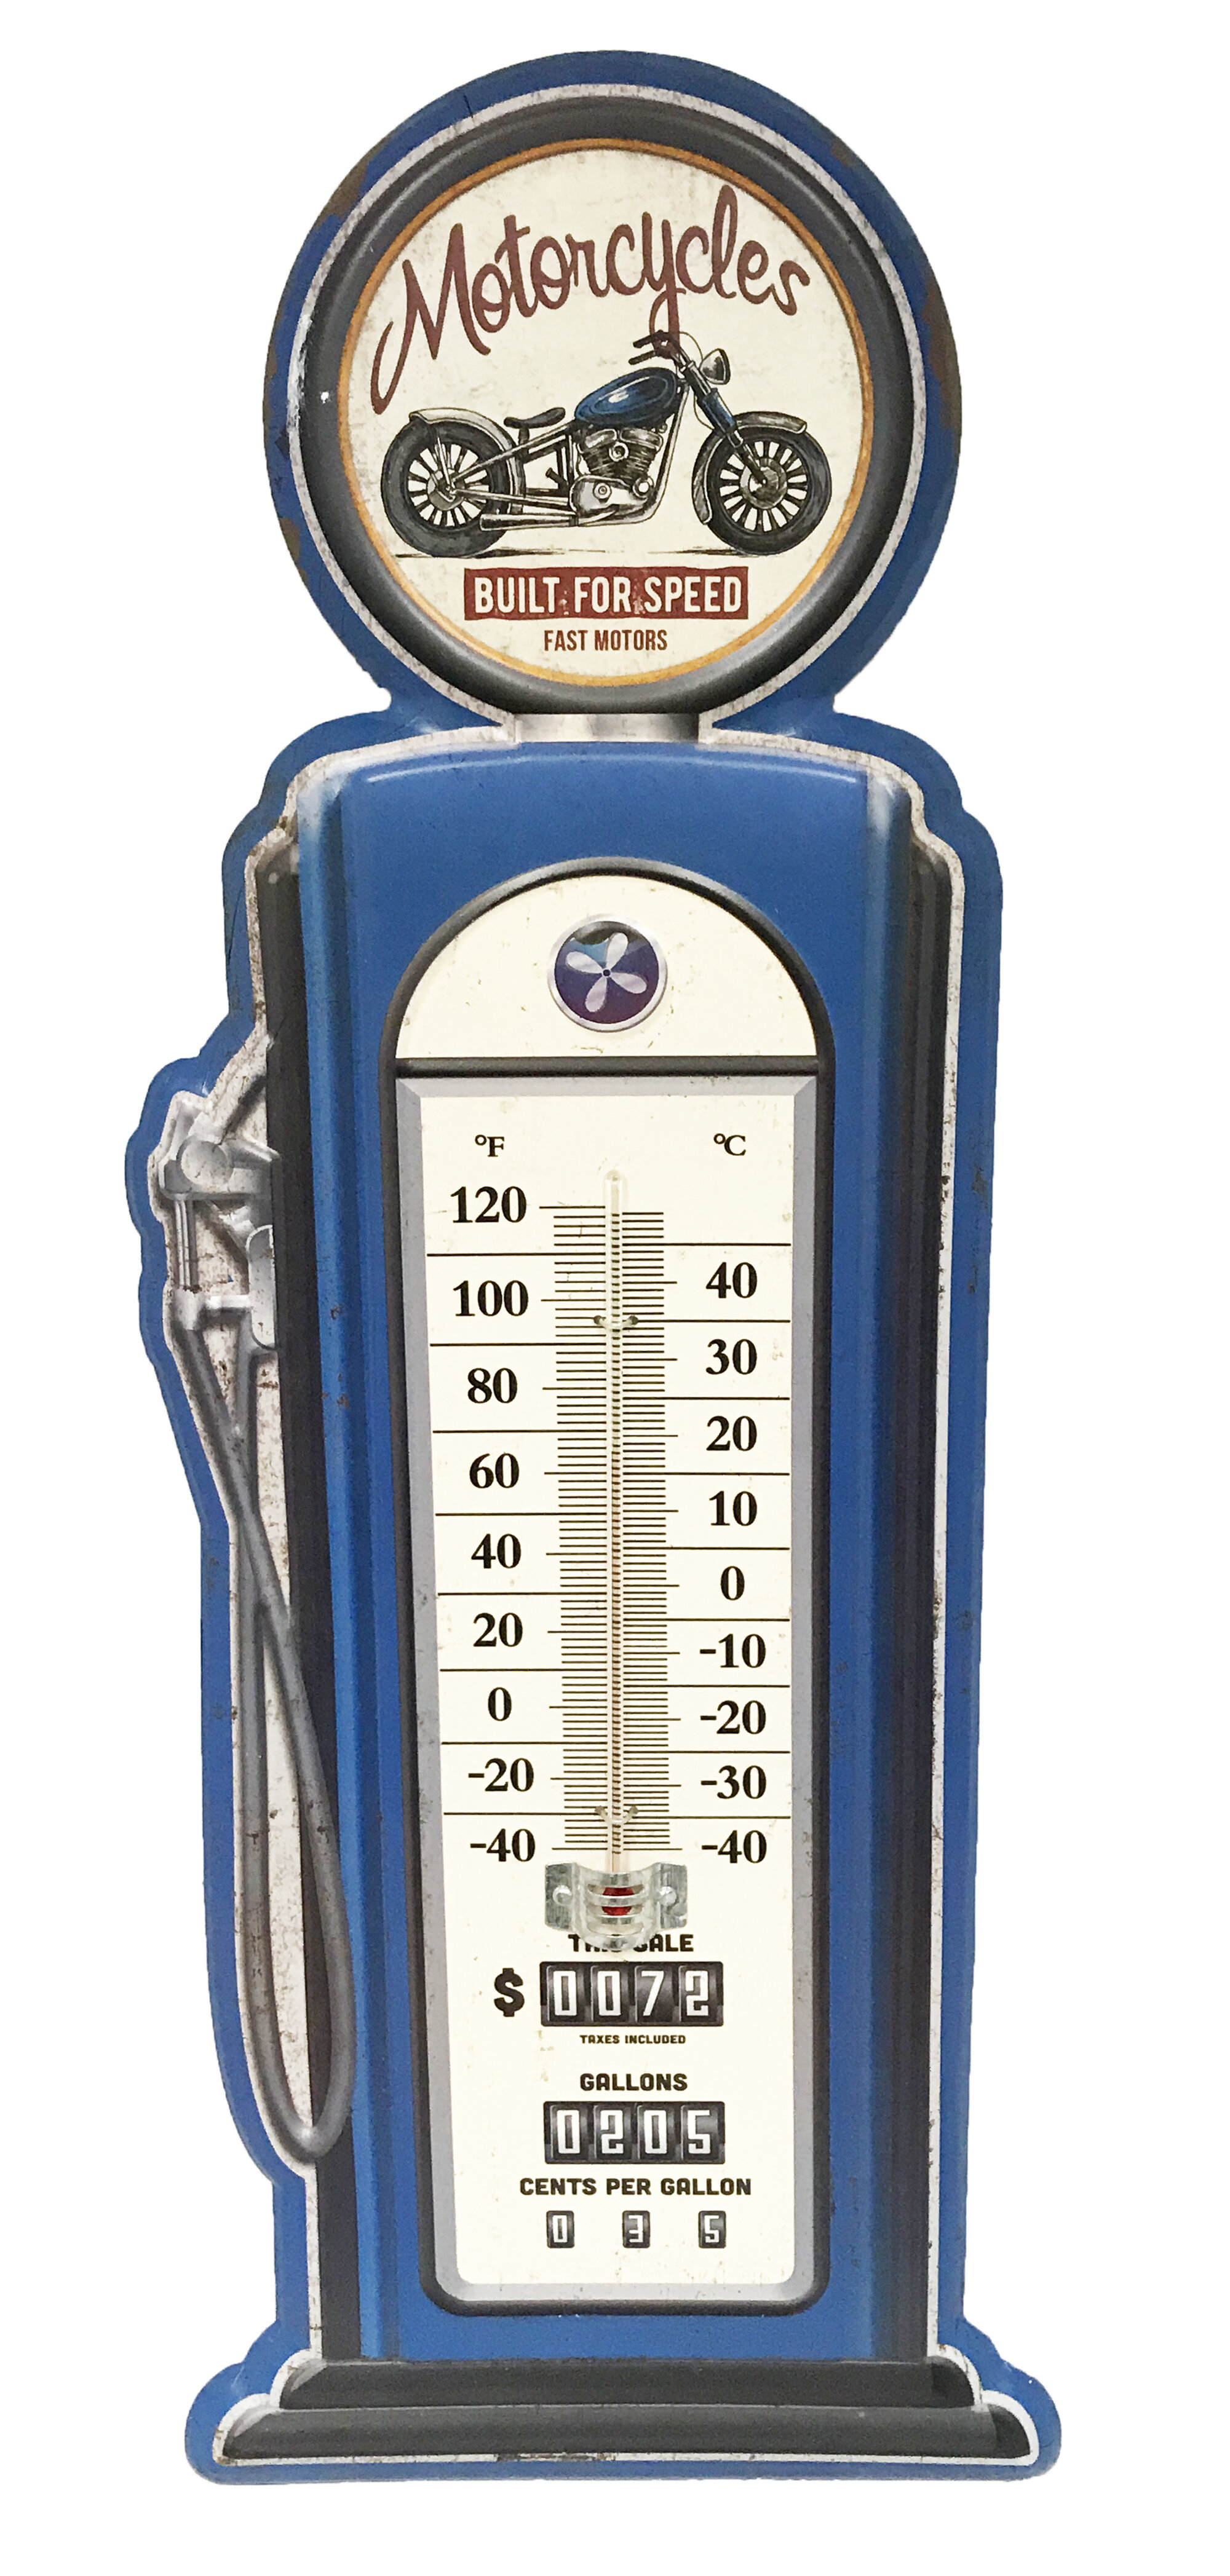 https://visualhunt.com/photos/title/5-expert-tips-to-choose-an-outdoor-thermometer.jpg